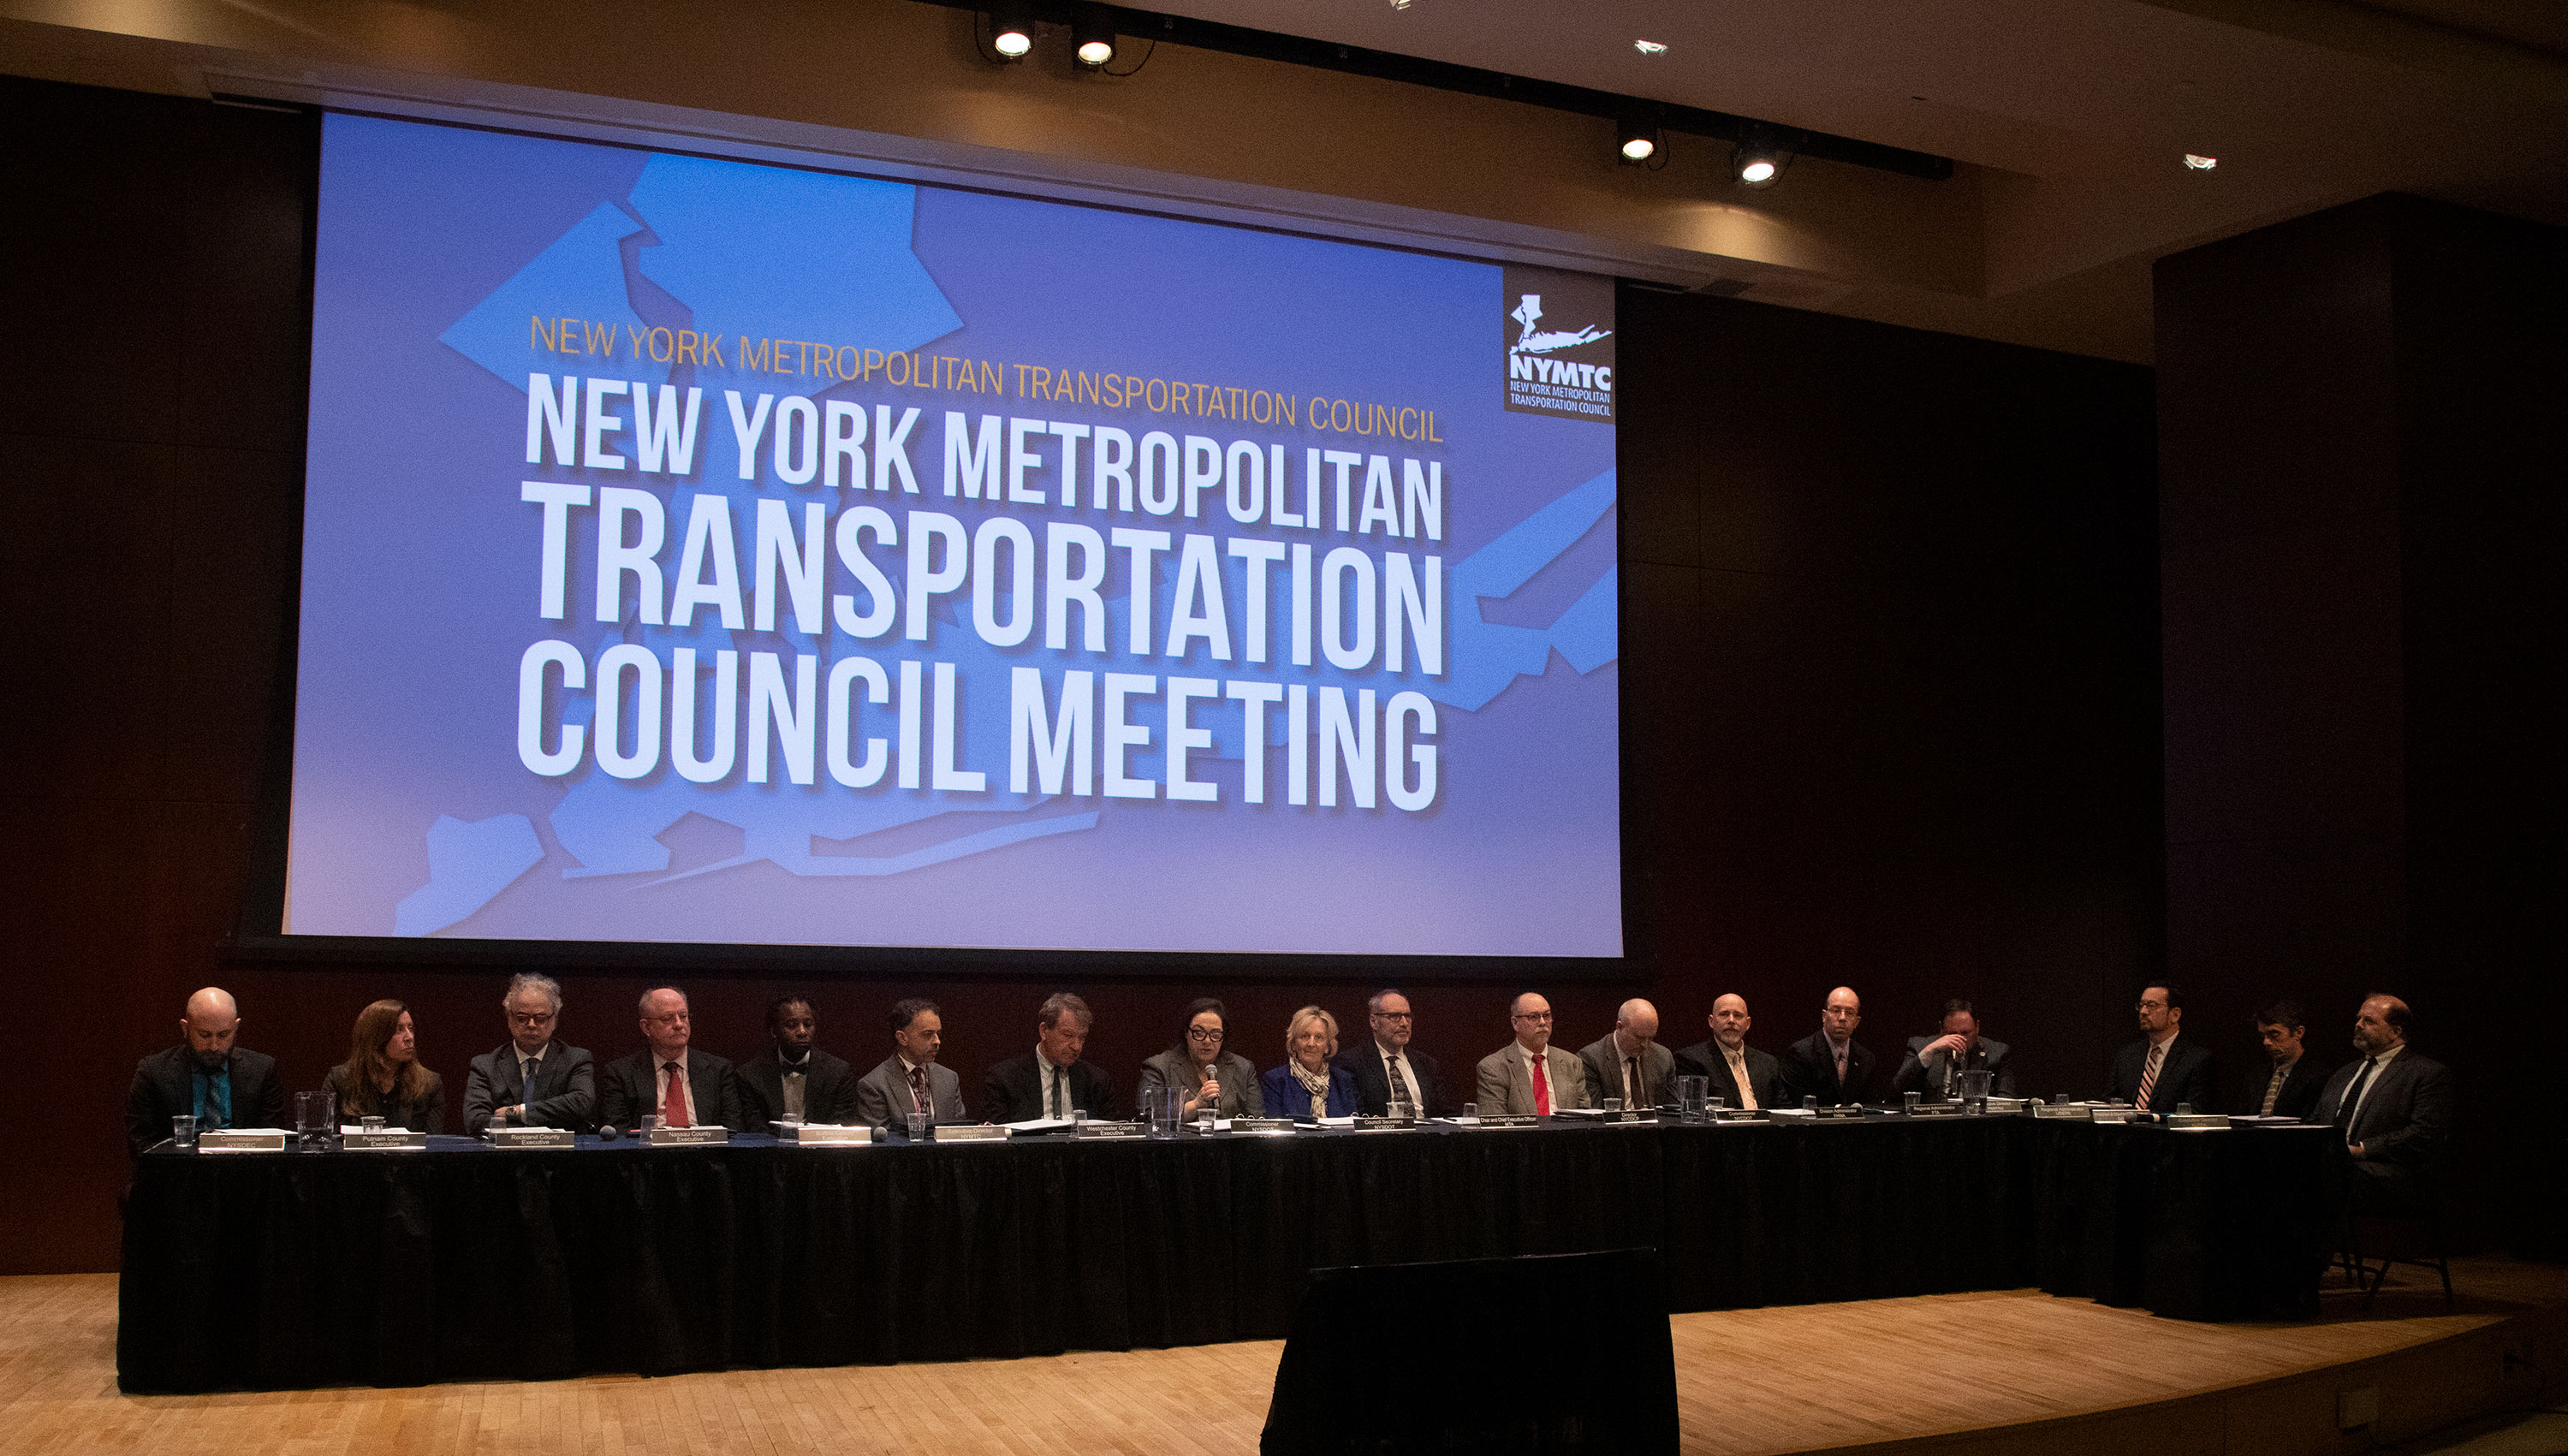 NYMTC HOSTS ITS ANNUAL MEETING 